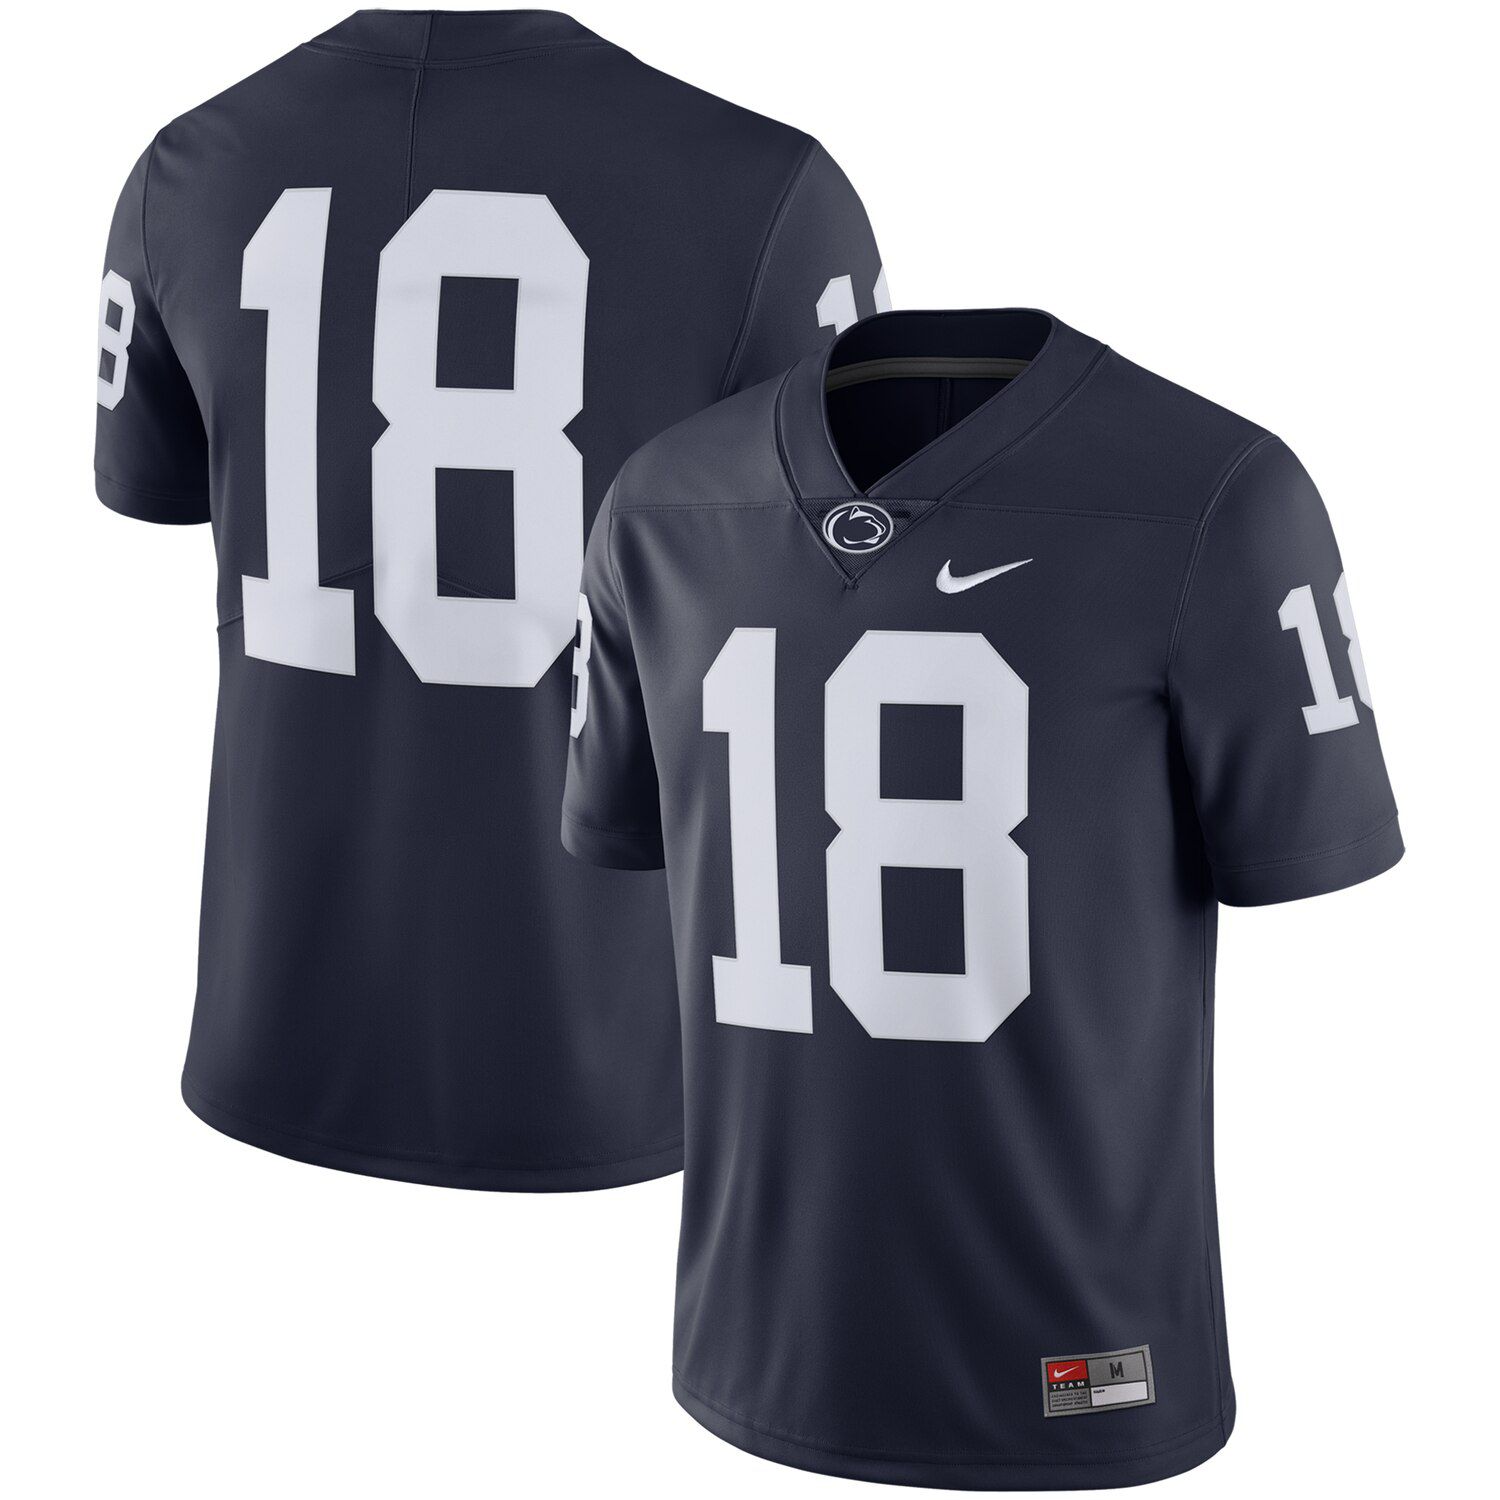 penn state limited jersey